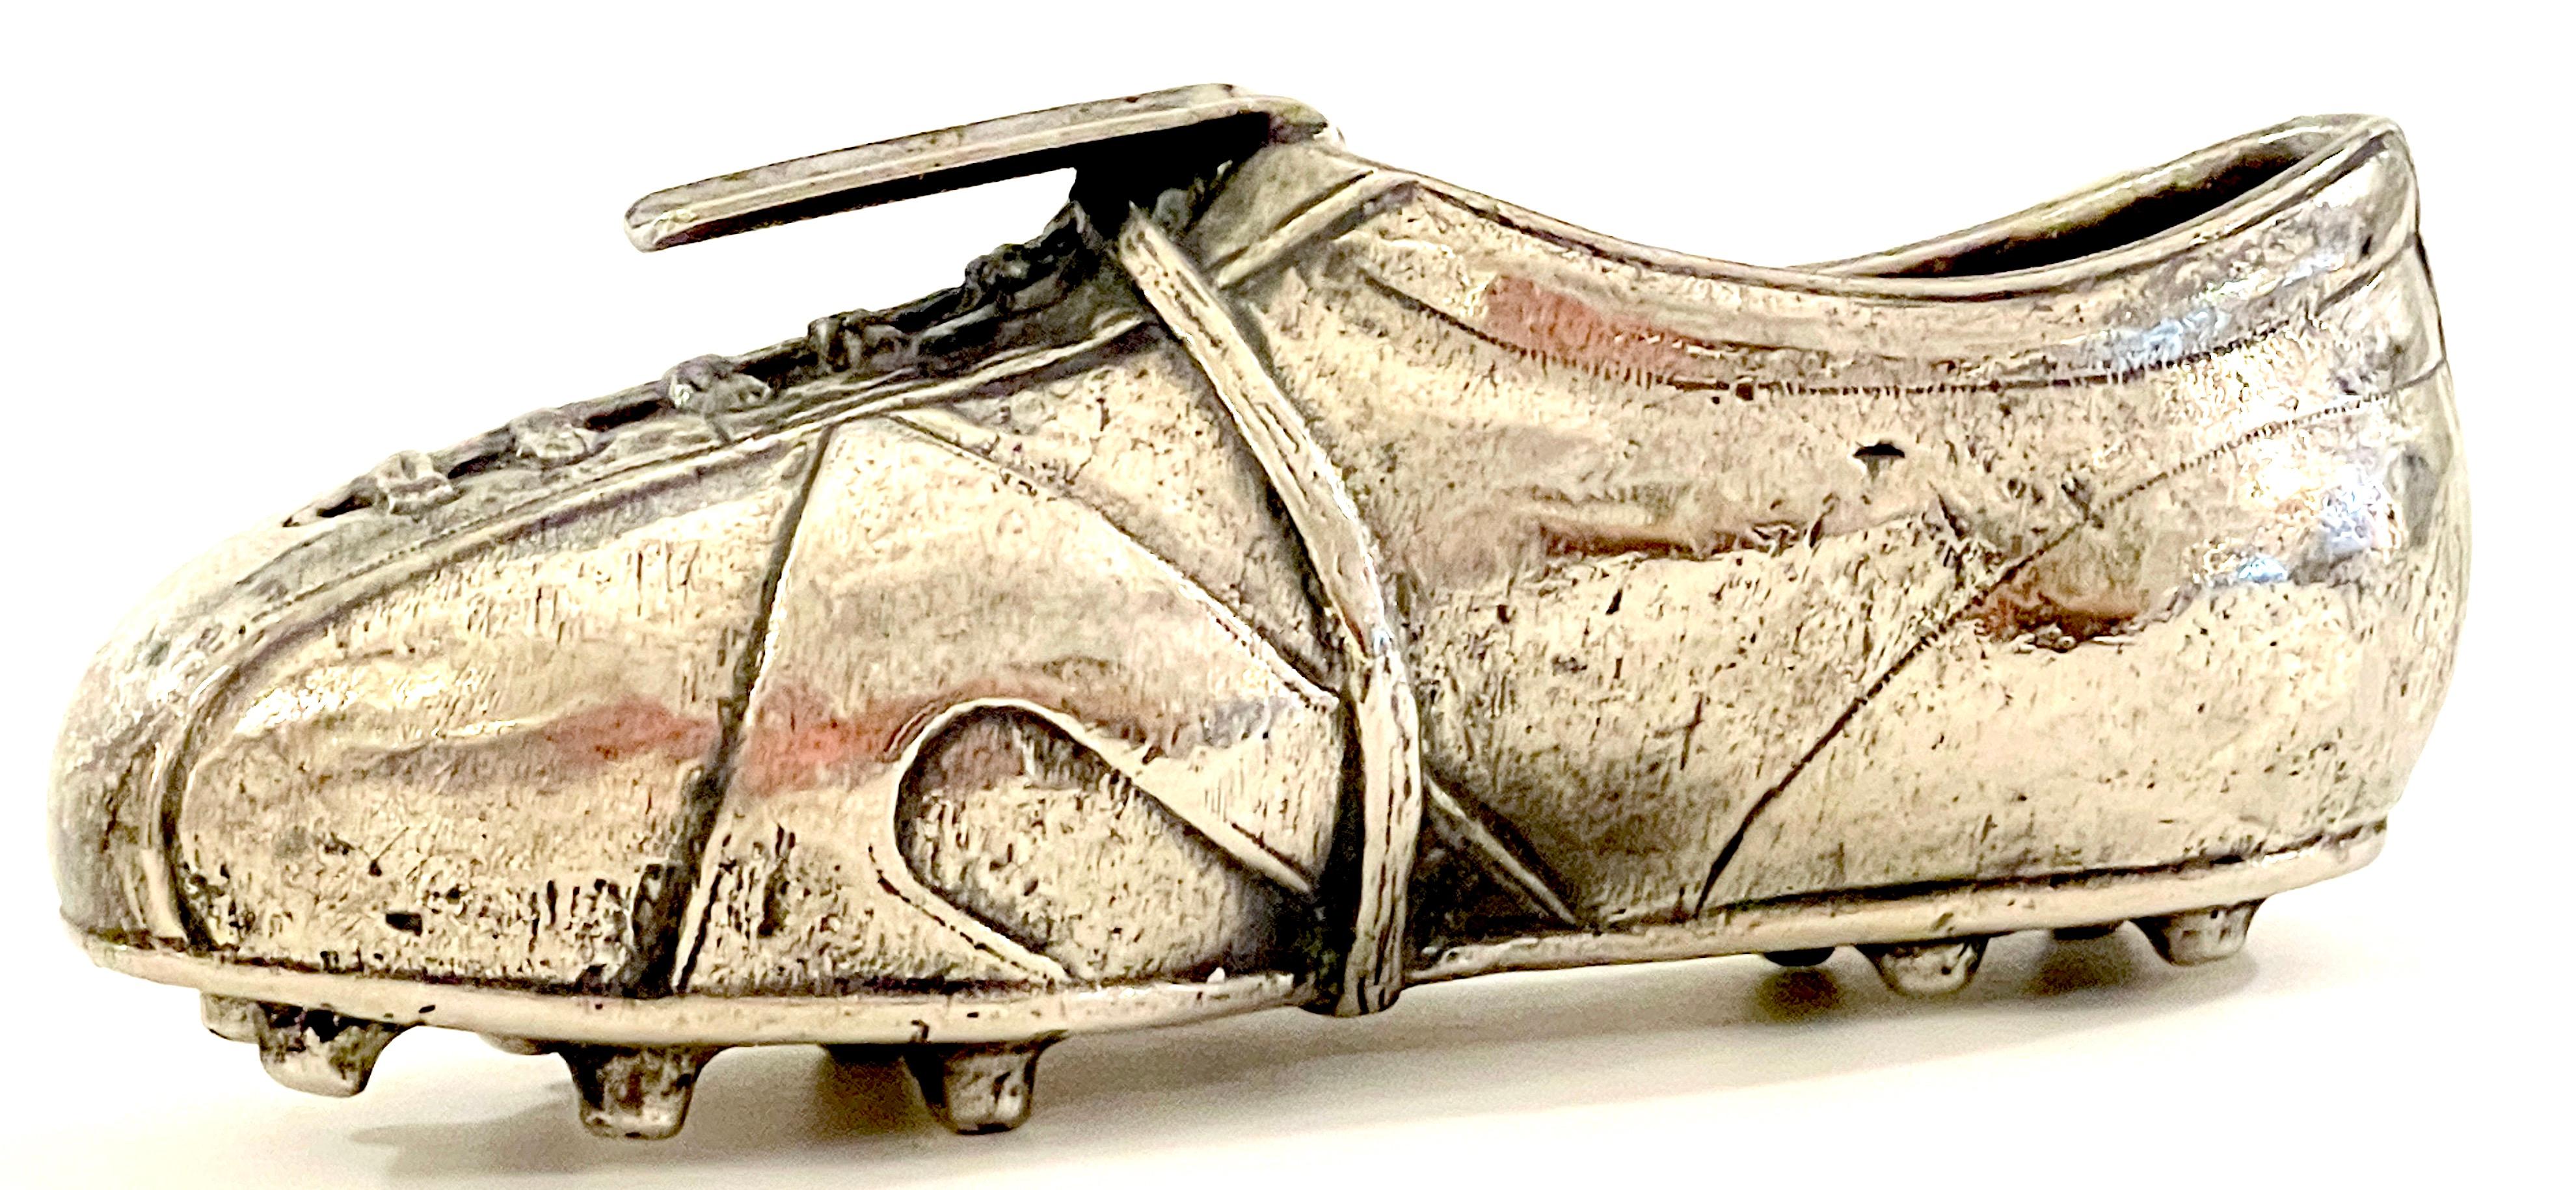 Italian silverplated football/ soccer Cleat ashtray 
Realistically cast and modeled as Football/ Soccer Cleat, a diminutive piece, suitable for individual use. 
Stamped 'PEI JPG Italy' 
Overall Measurements :
4-Inches wide x 1.5-Inches high x